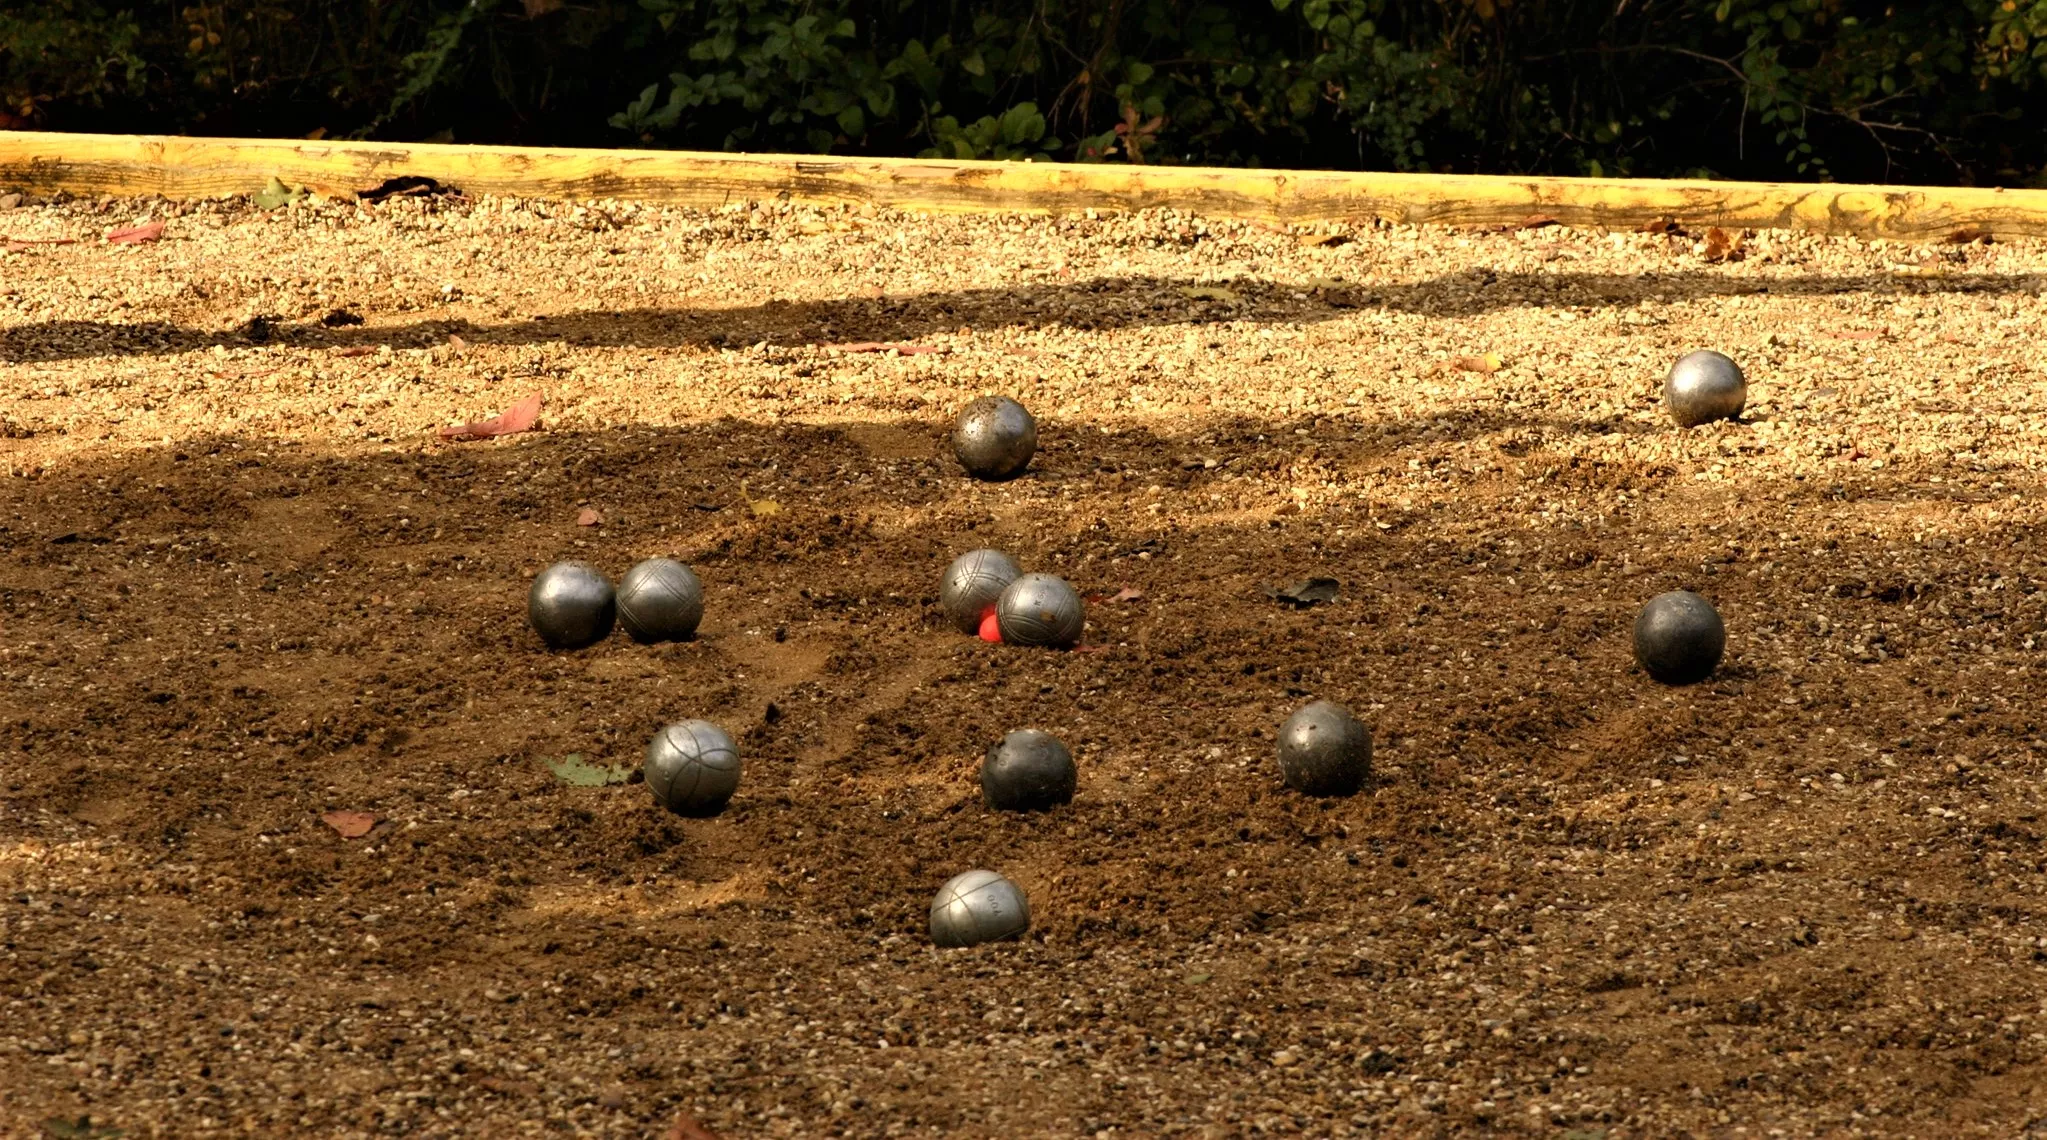 Major Petanque in Hungary, Europe | Petanque - Rated 1